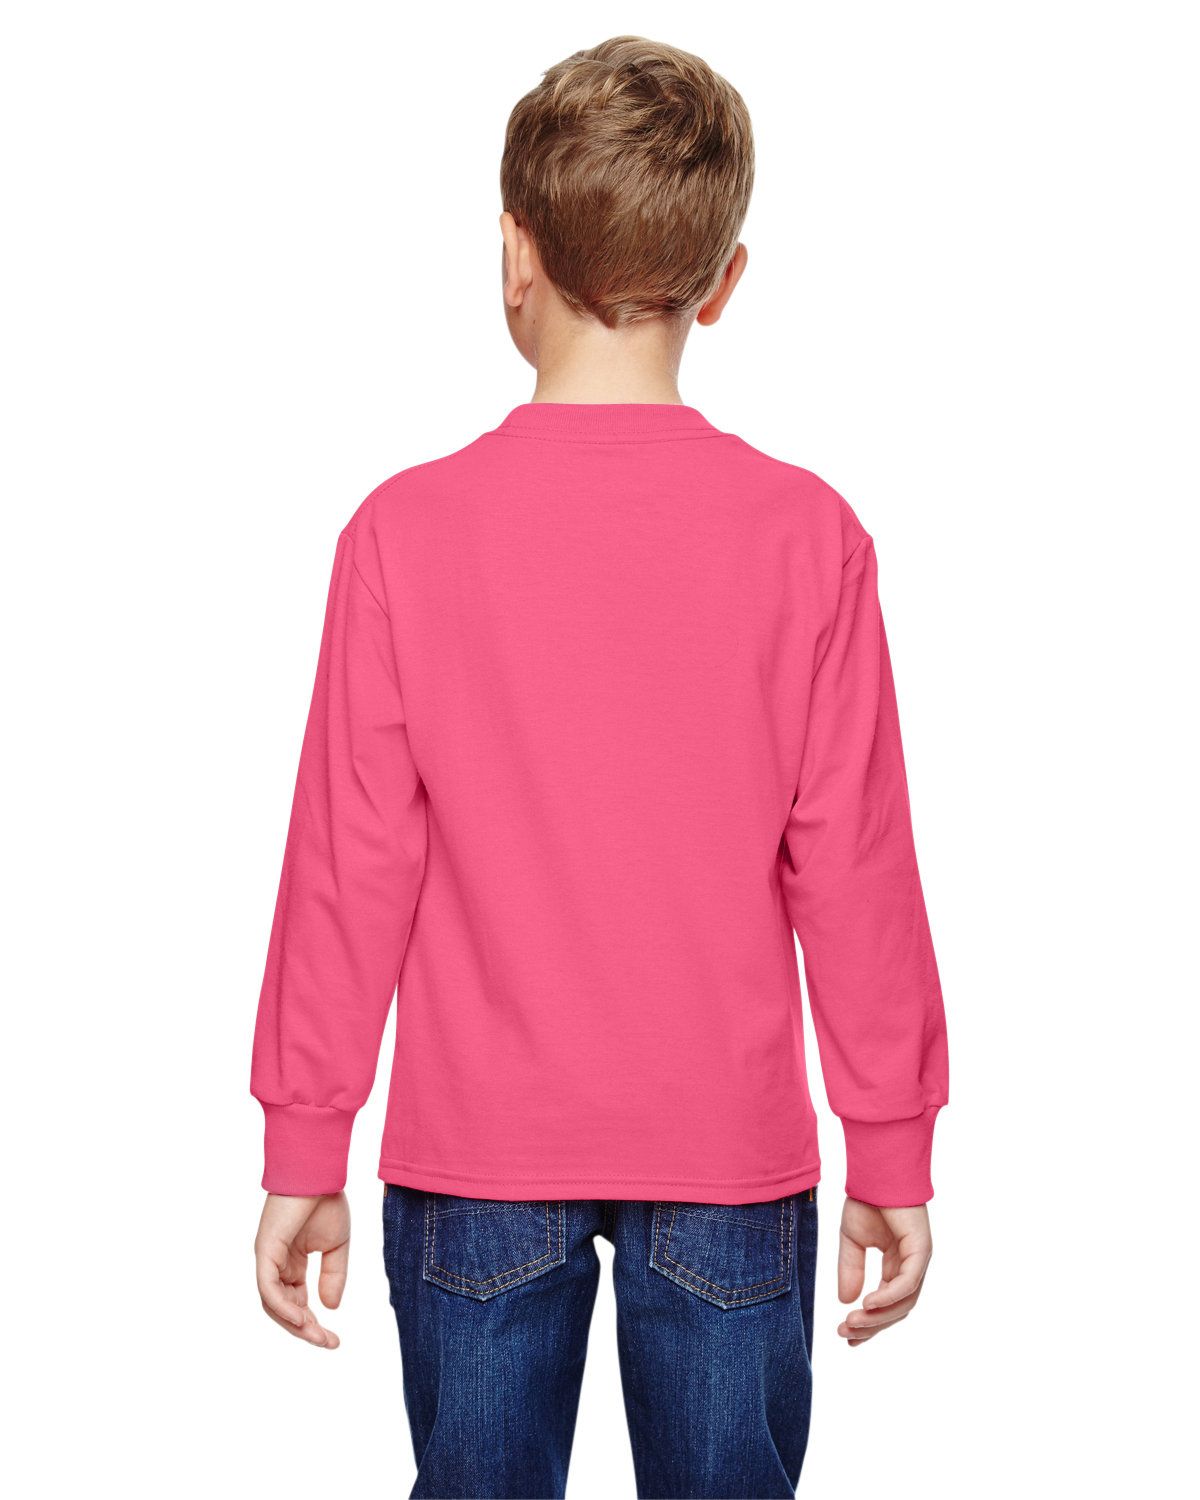 'Fruit of the Loom 4930B Youth HD Cotton Long-Sleeve T-Shirt'